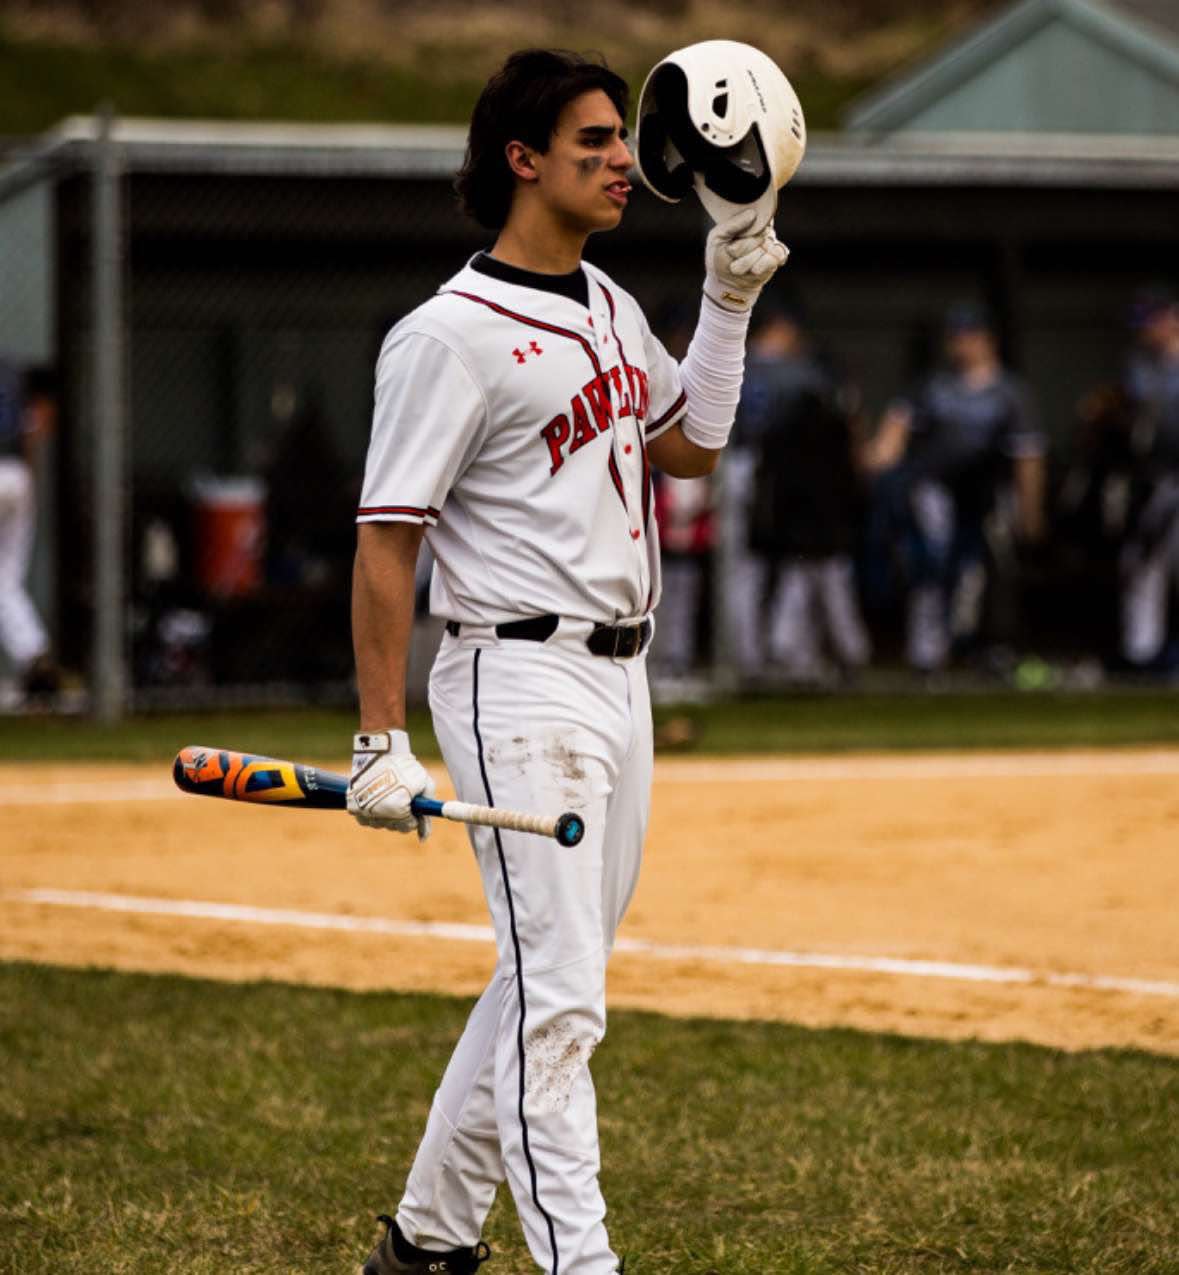 Pawling's Lucas Carrozza hit two homers in the eighth inning to help spark a 19-10 win over North Salem.